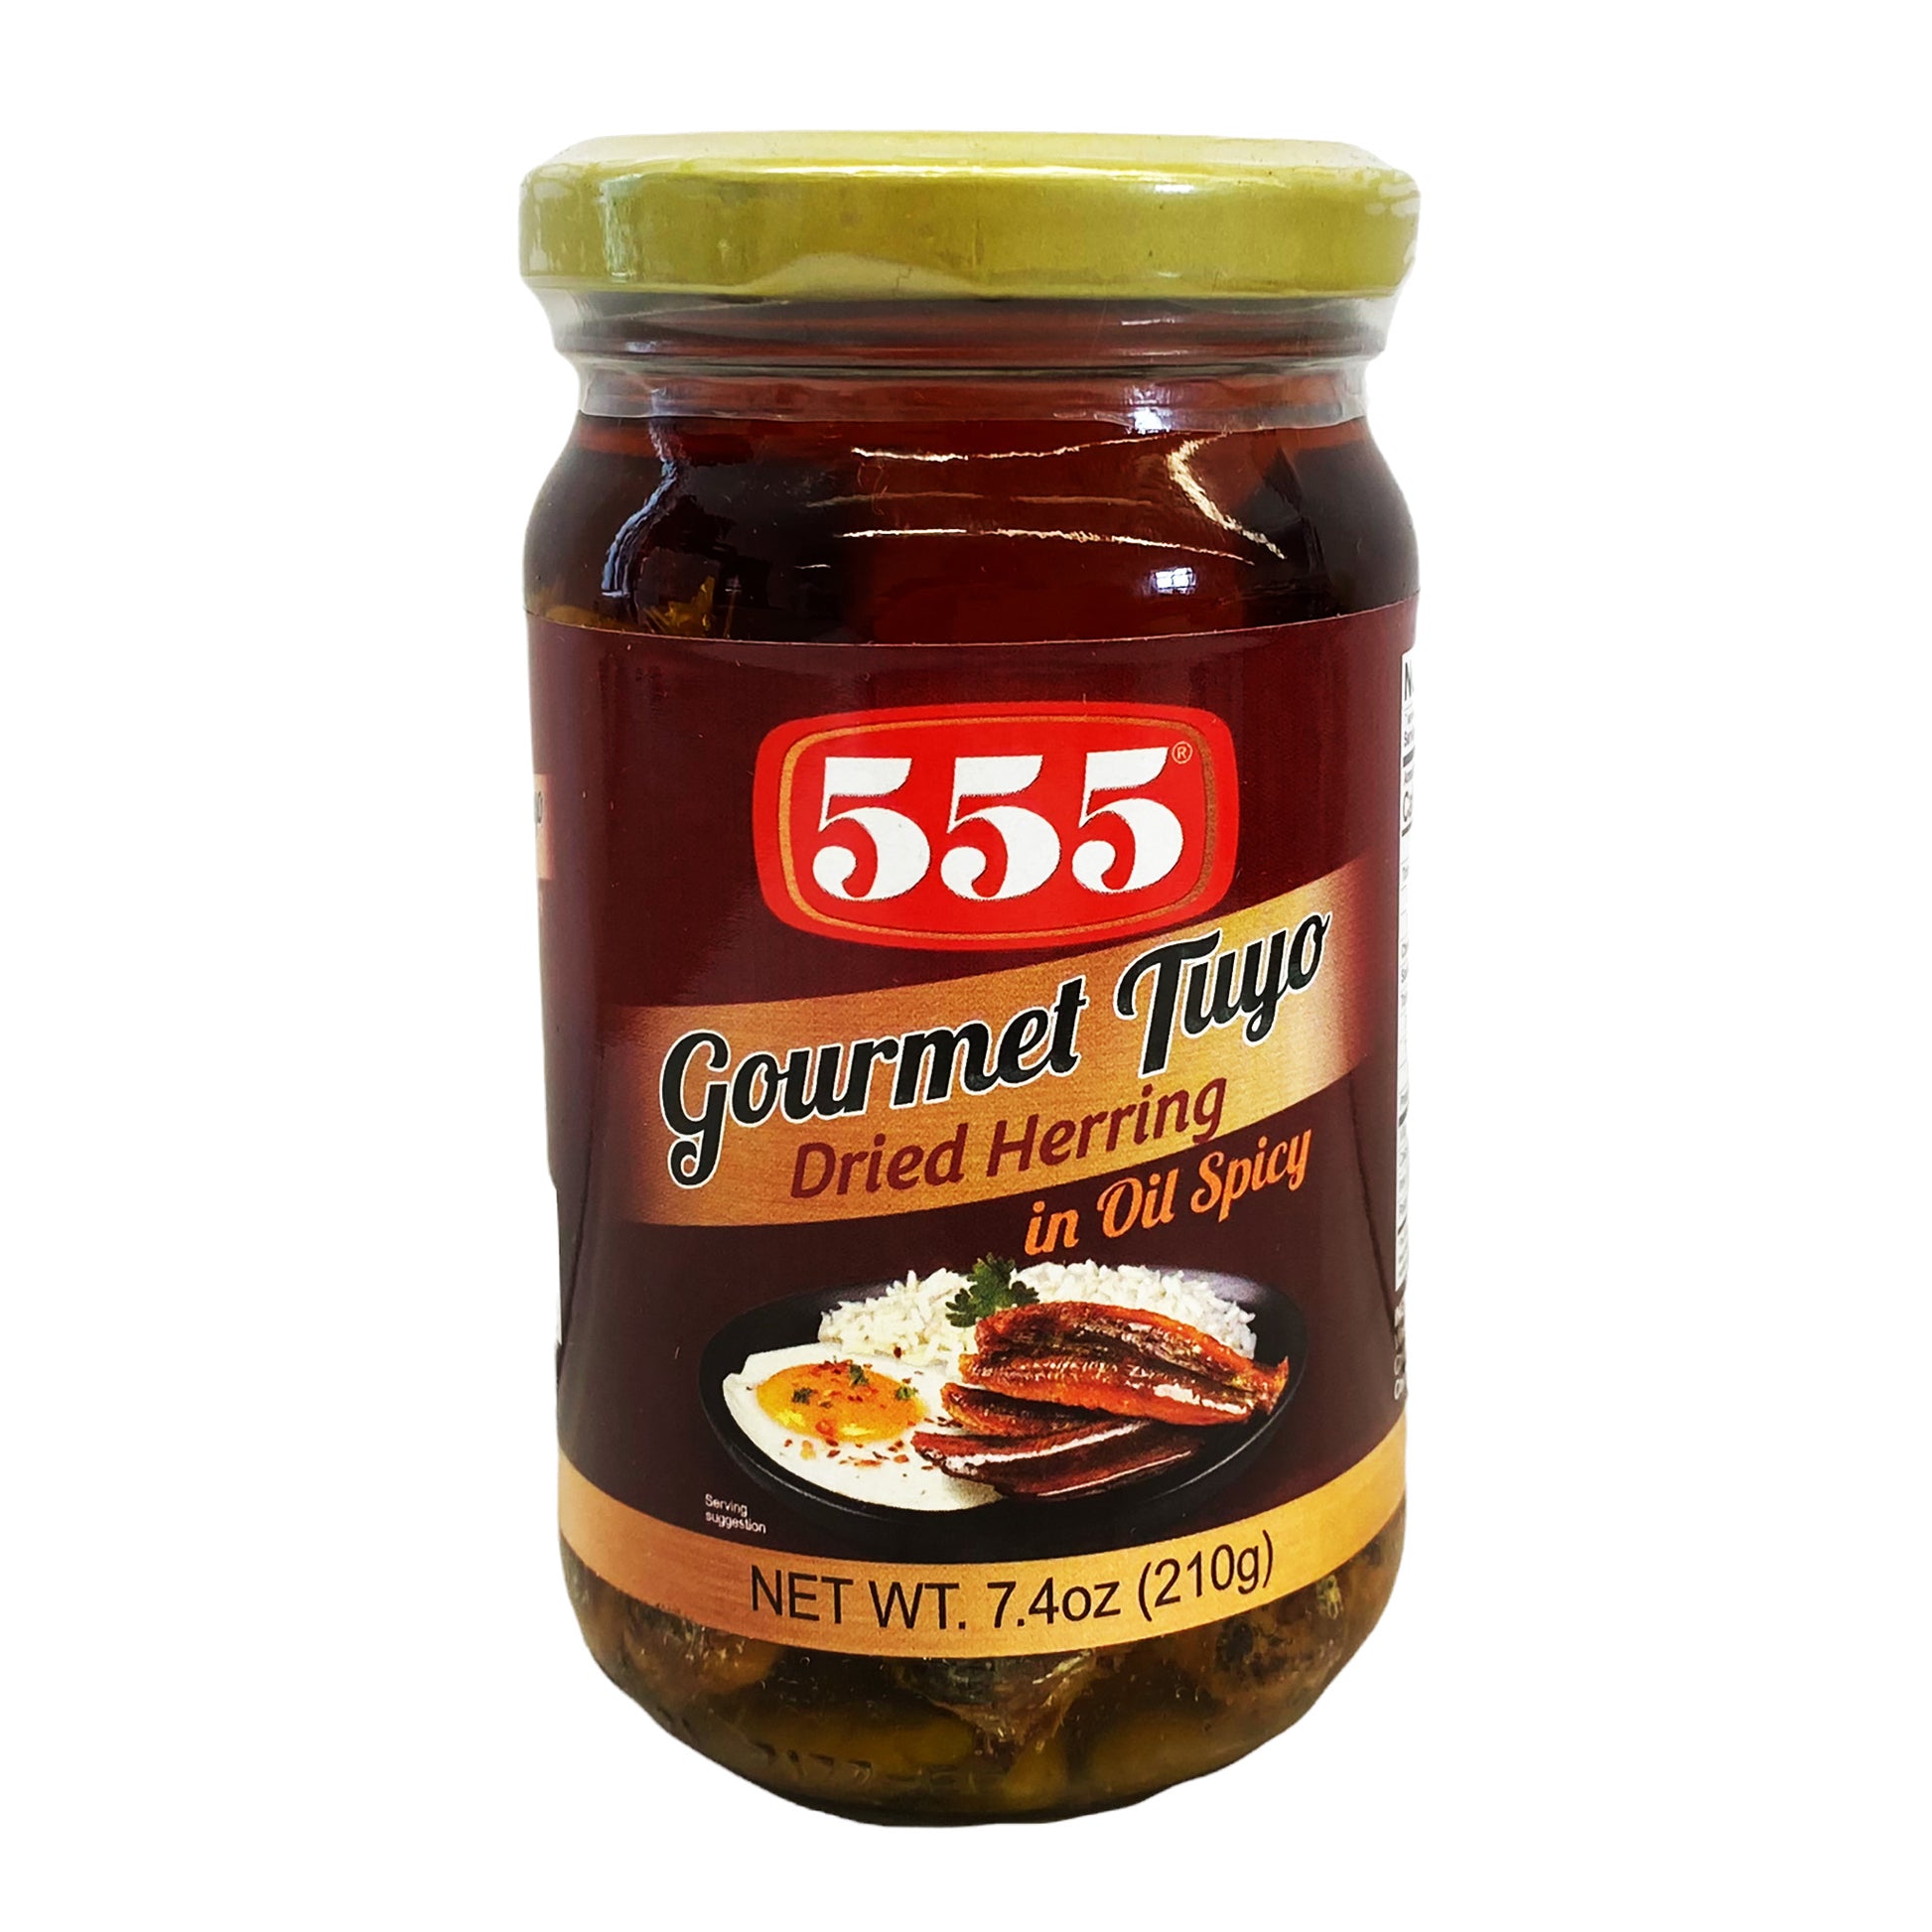 Front graphic image of 555 Gourmet Tuyo Dried Herring in Oil - Spicy 7.4oz (210g)